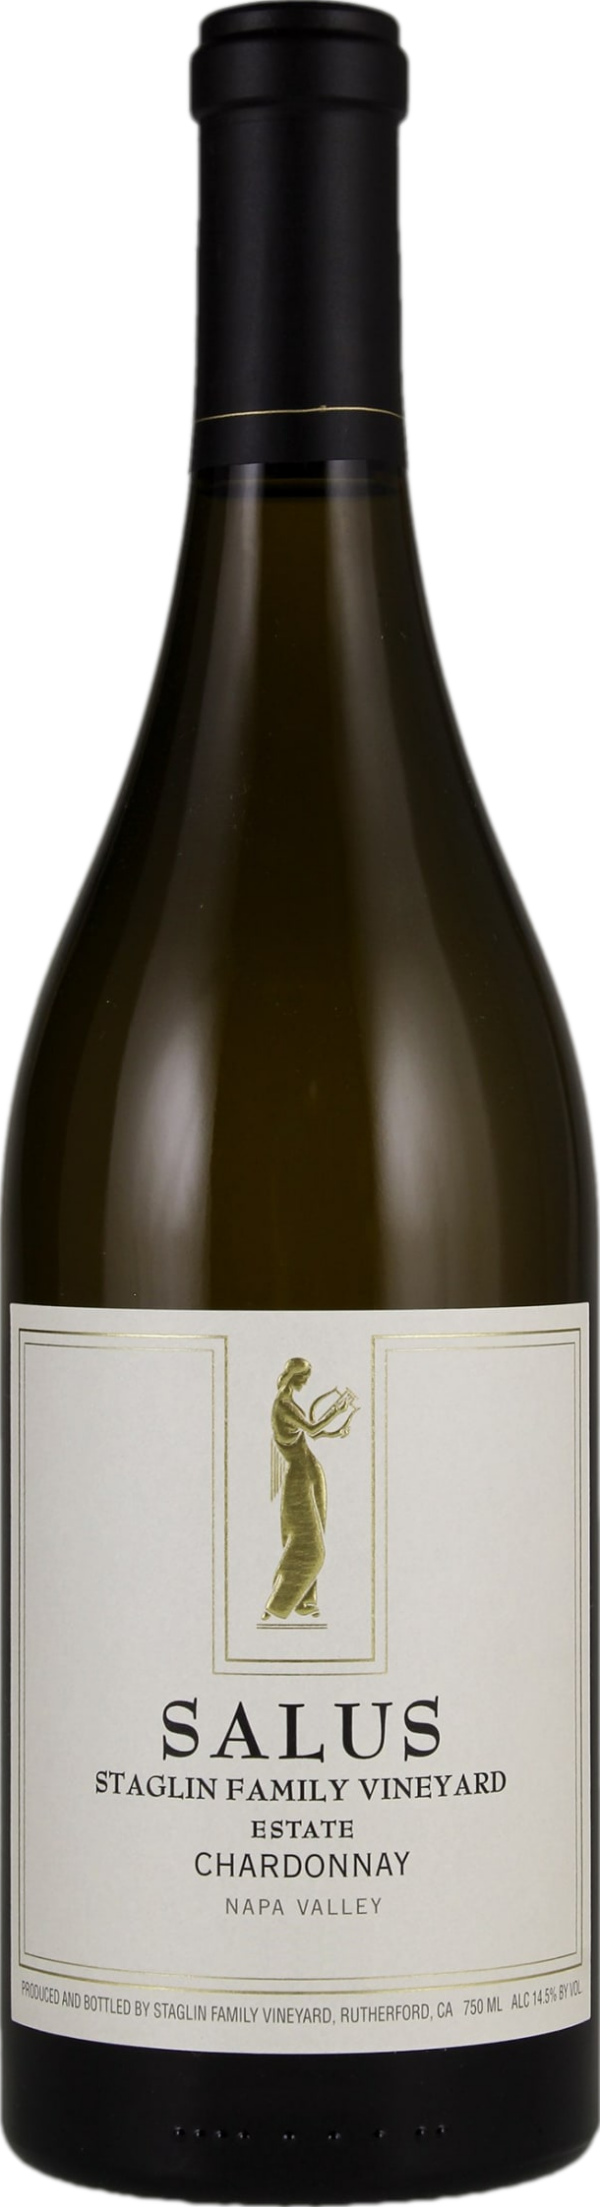 Product image of Staglin Salus Estate Chardonnay 2021 from 8wines